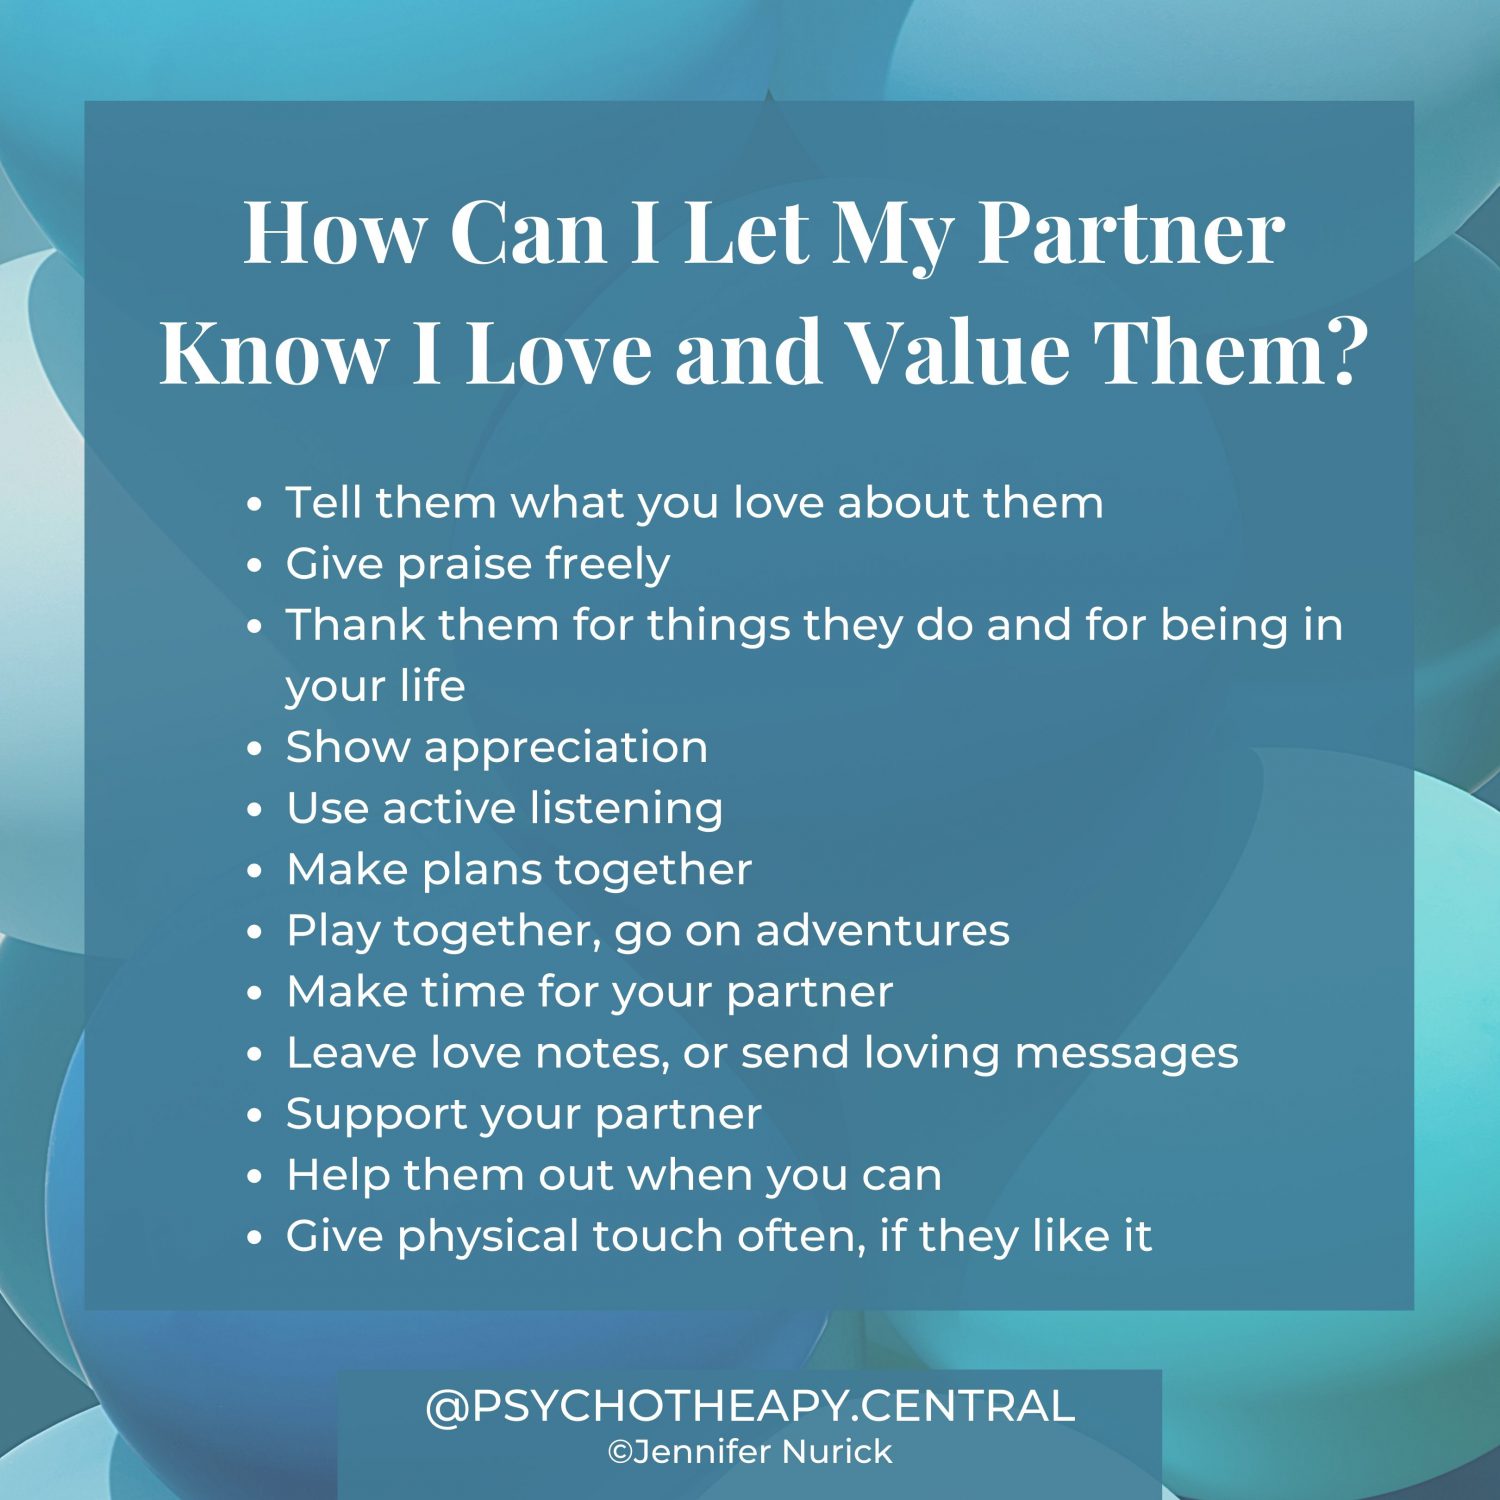 How Can I Let My Partner Know I Love and Value Them? Tell them what you love about them Give praise freely Thank them for things they do and for being in your life Show appreciation Use active listening Make plans together Play together, go on adventures Make time for your partner Leave love notes, or send loving messages Support your partner Help them out when you can